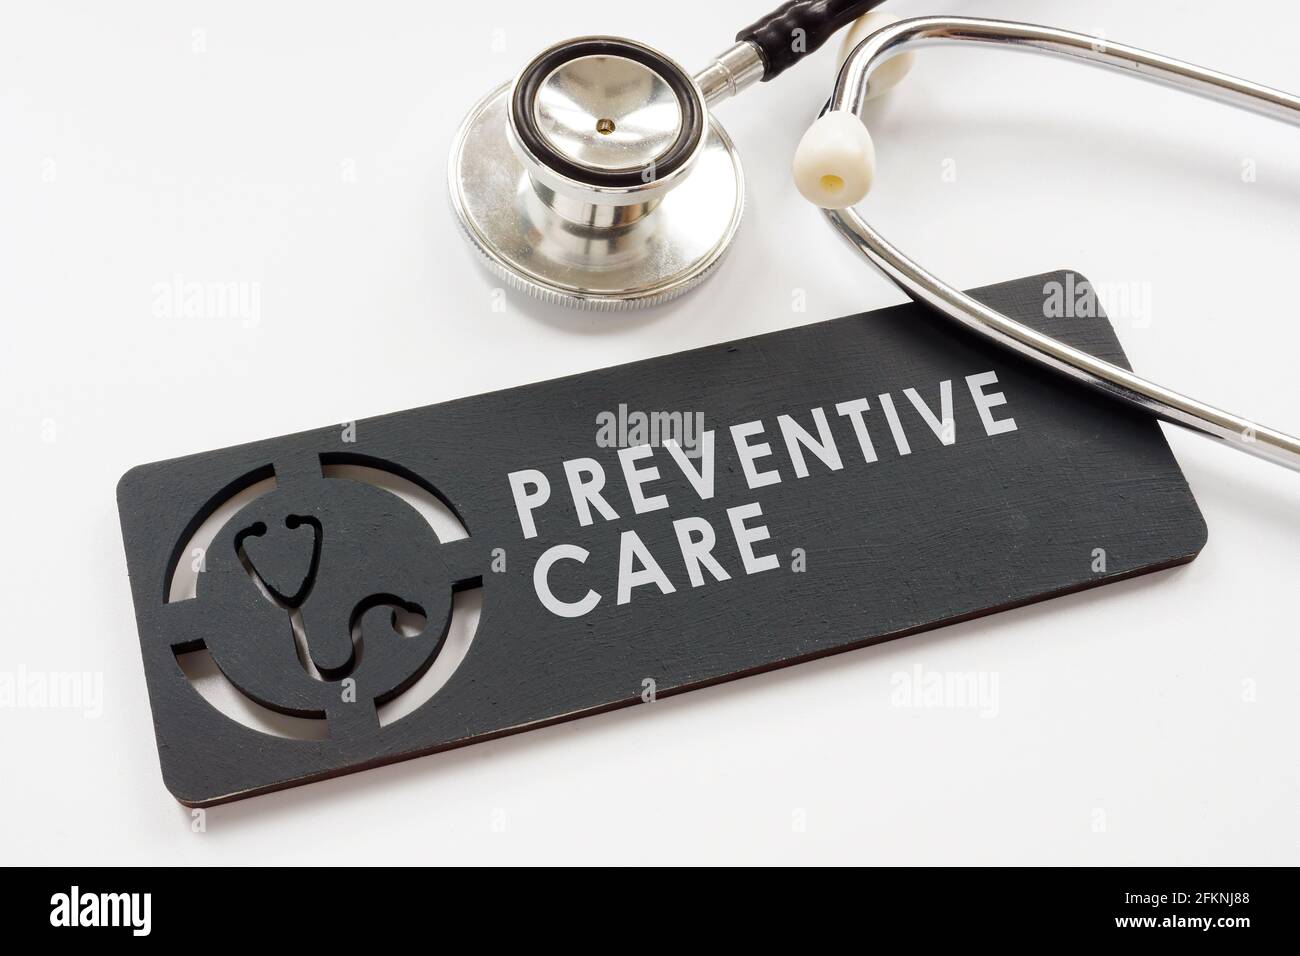 Medical preventive care and services for health plate and stethoscope. Stock Photo